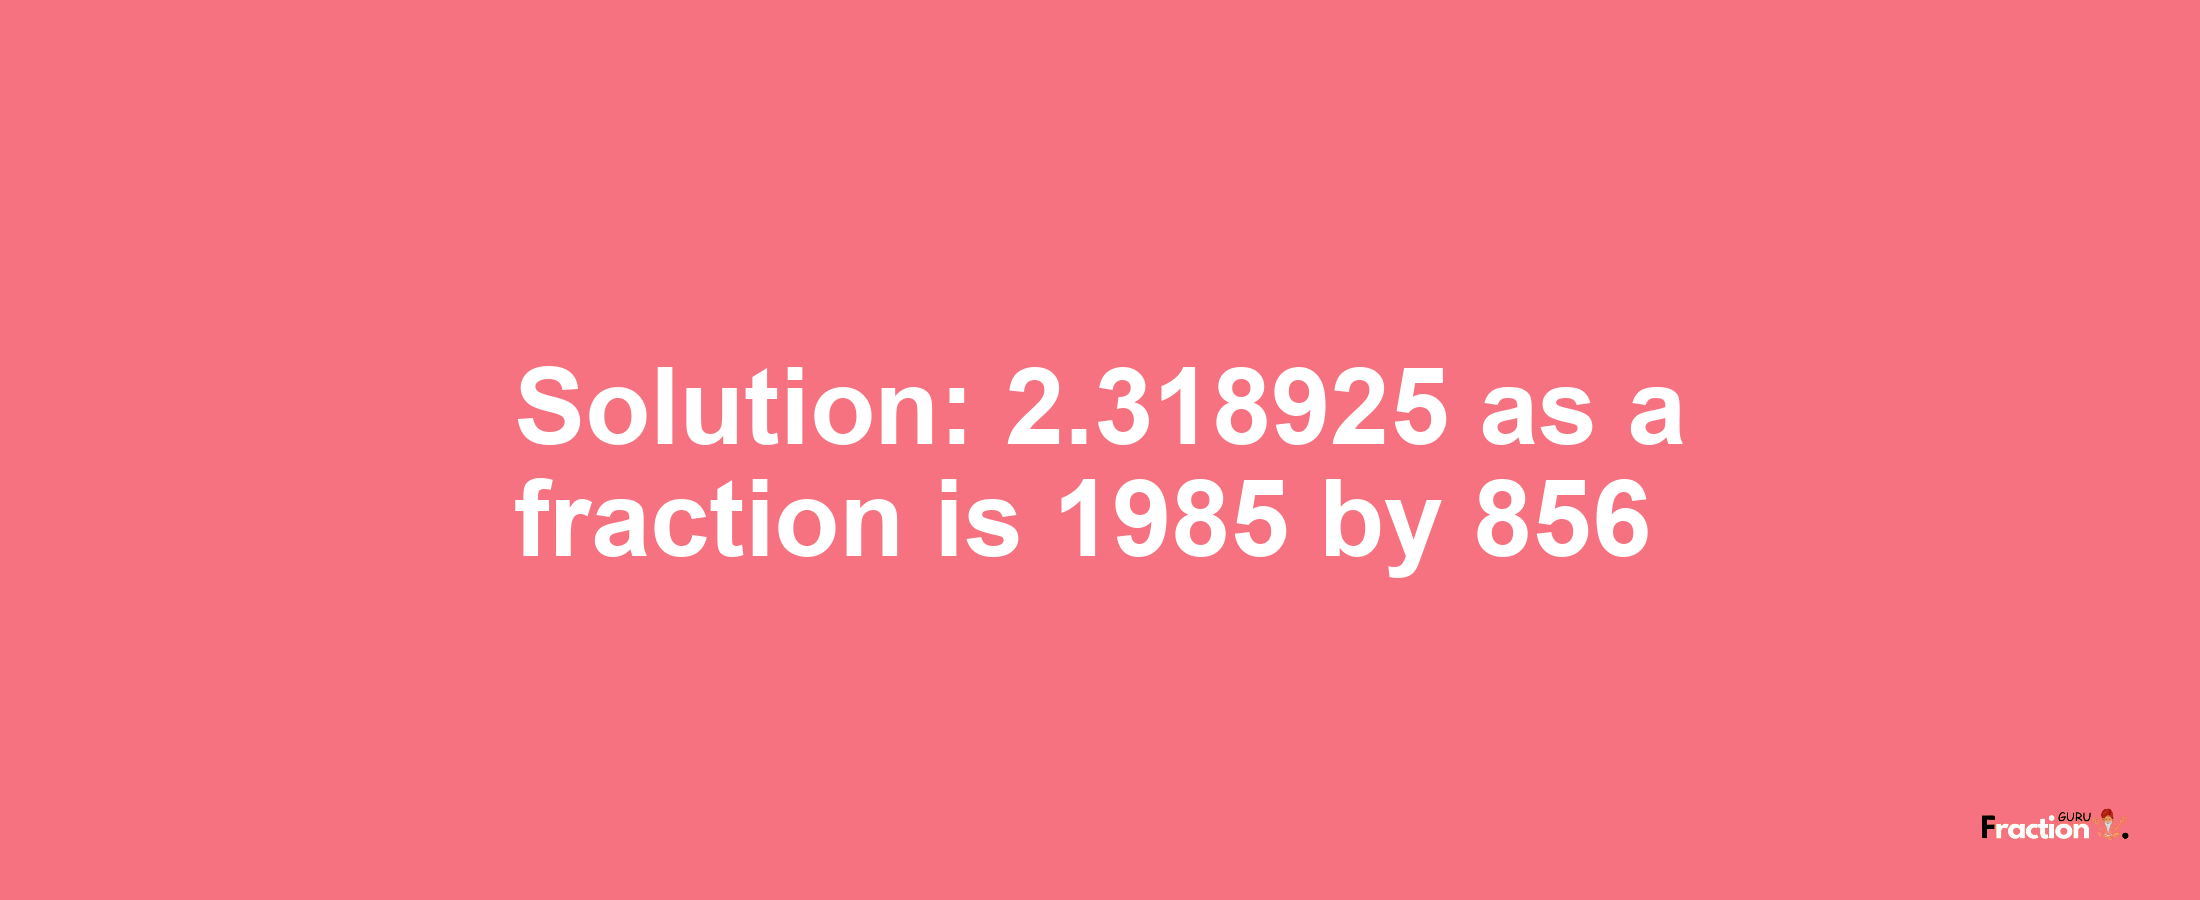 Solution:2.318925 as a fraction is 1985/856